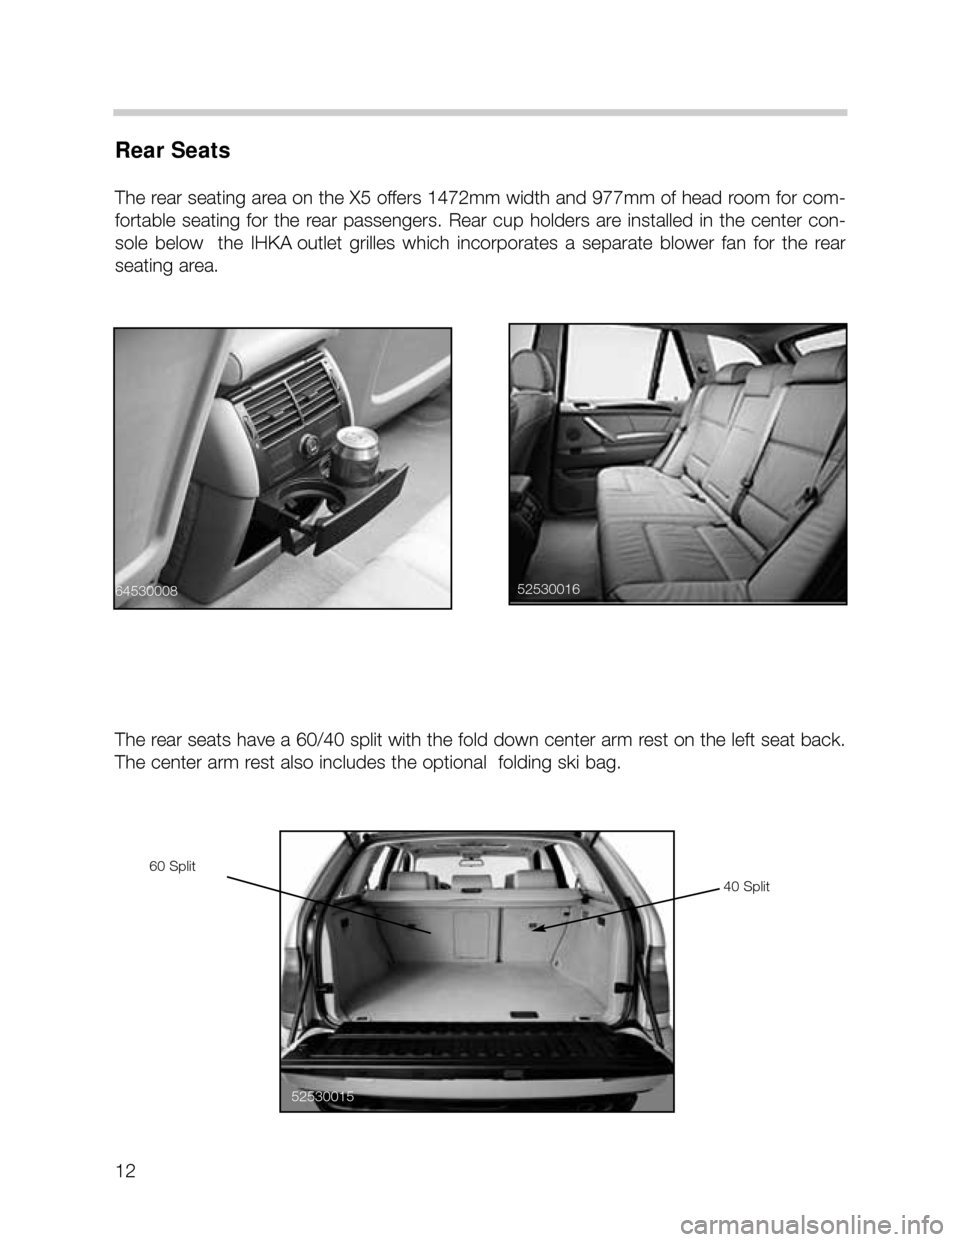 BMW X5 2004 E53 User Guide 12
Rear Seats
The rear seating area on the X5 offers 1472mm width and 977mm of head room for com-
fortable  seating  for  the  rear  passengers.  Rear  cup  holders  are  installed  in  the  center  c